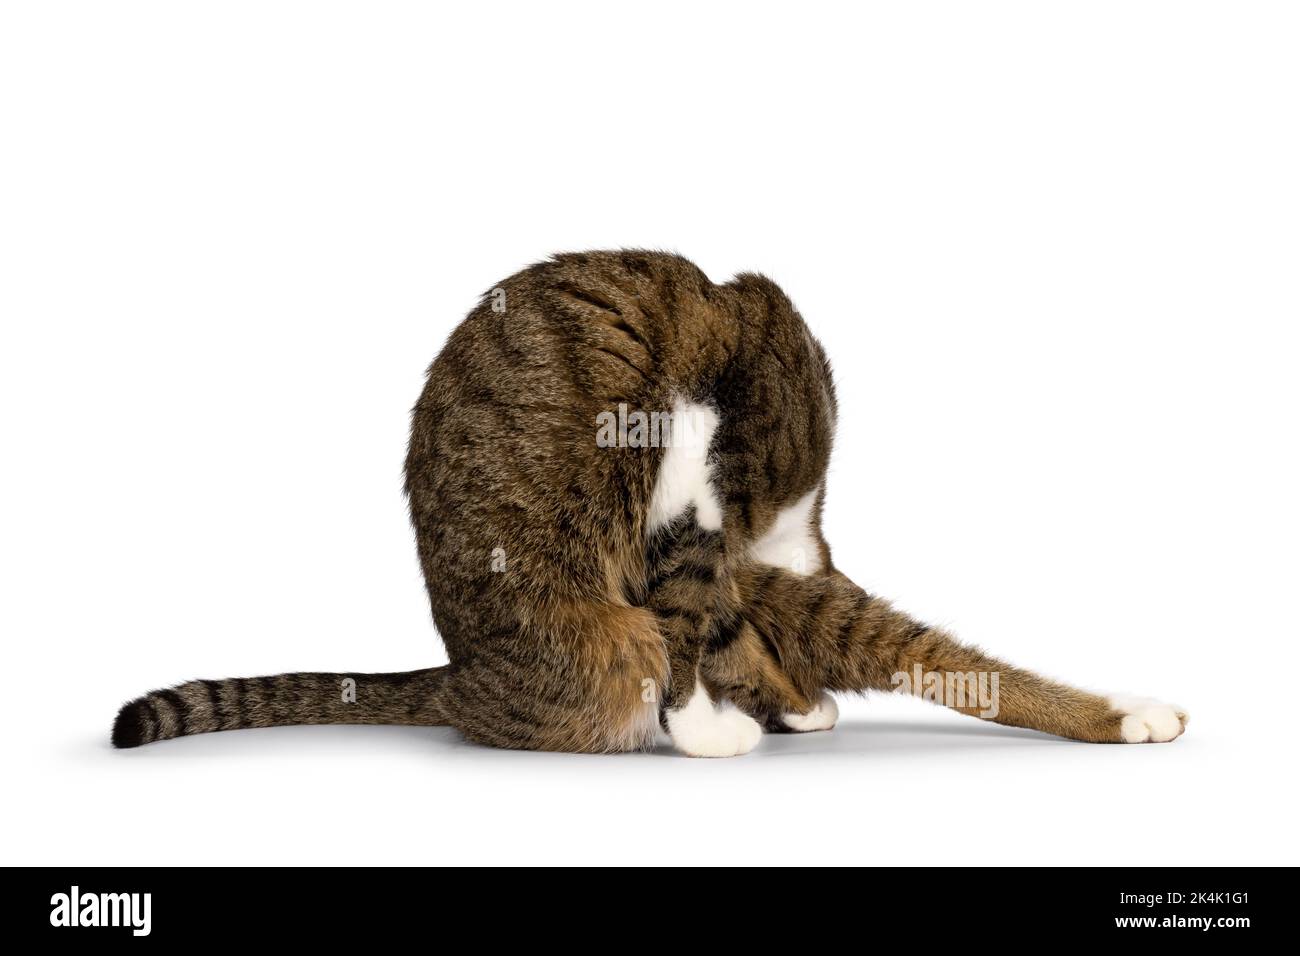 Funny yoga pose of pretty brown tabby with white house cat. No face. Isolated on a white background. Stock Photo